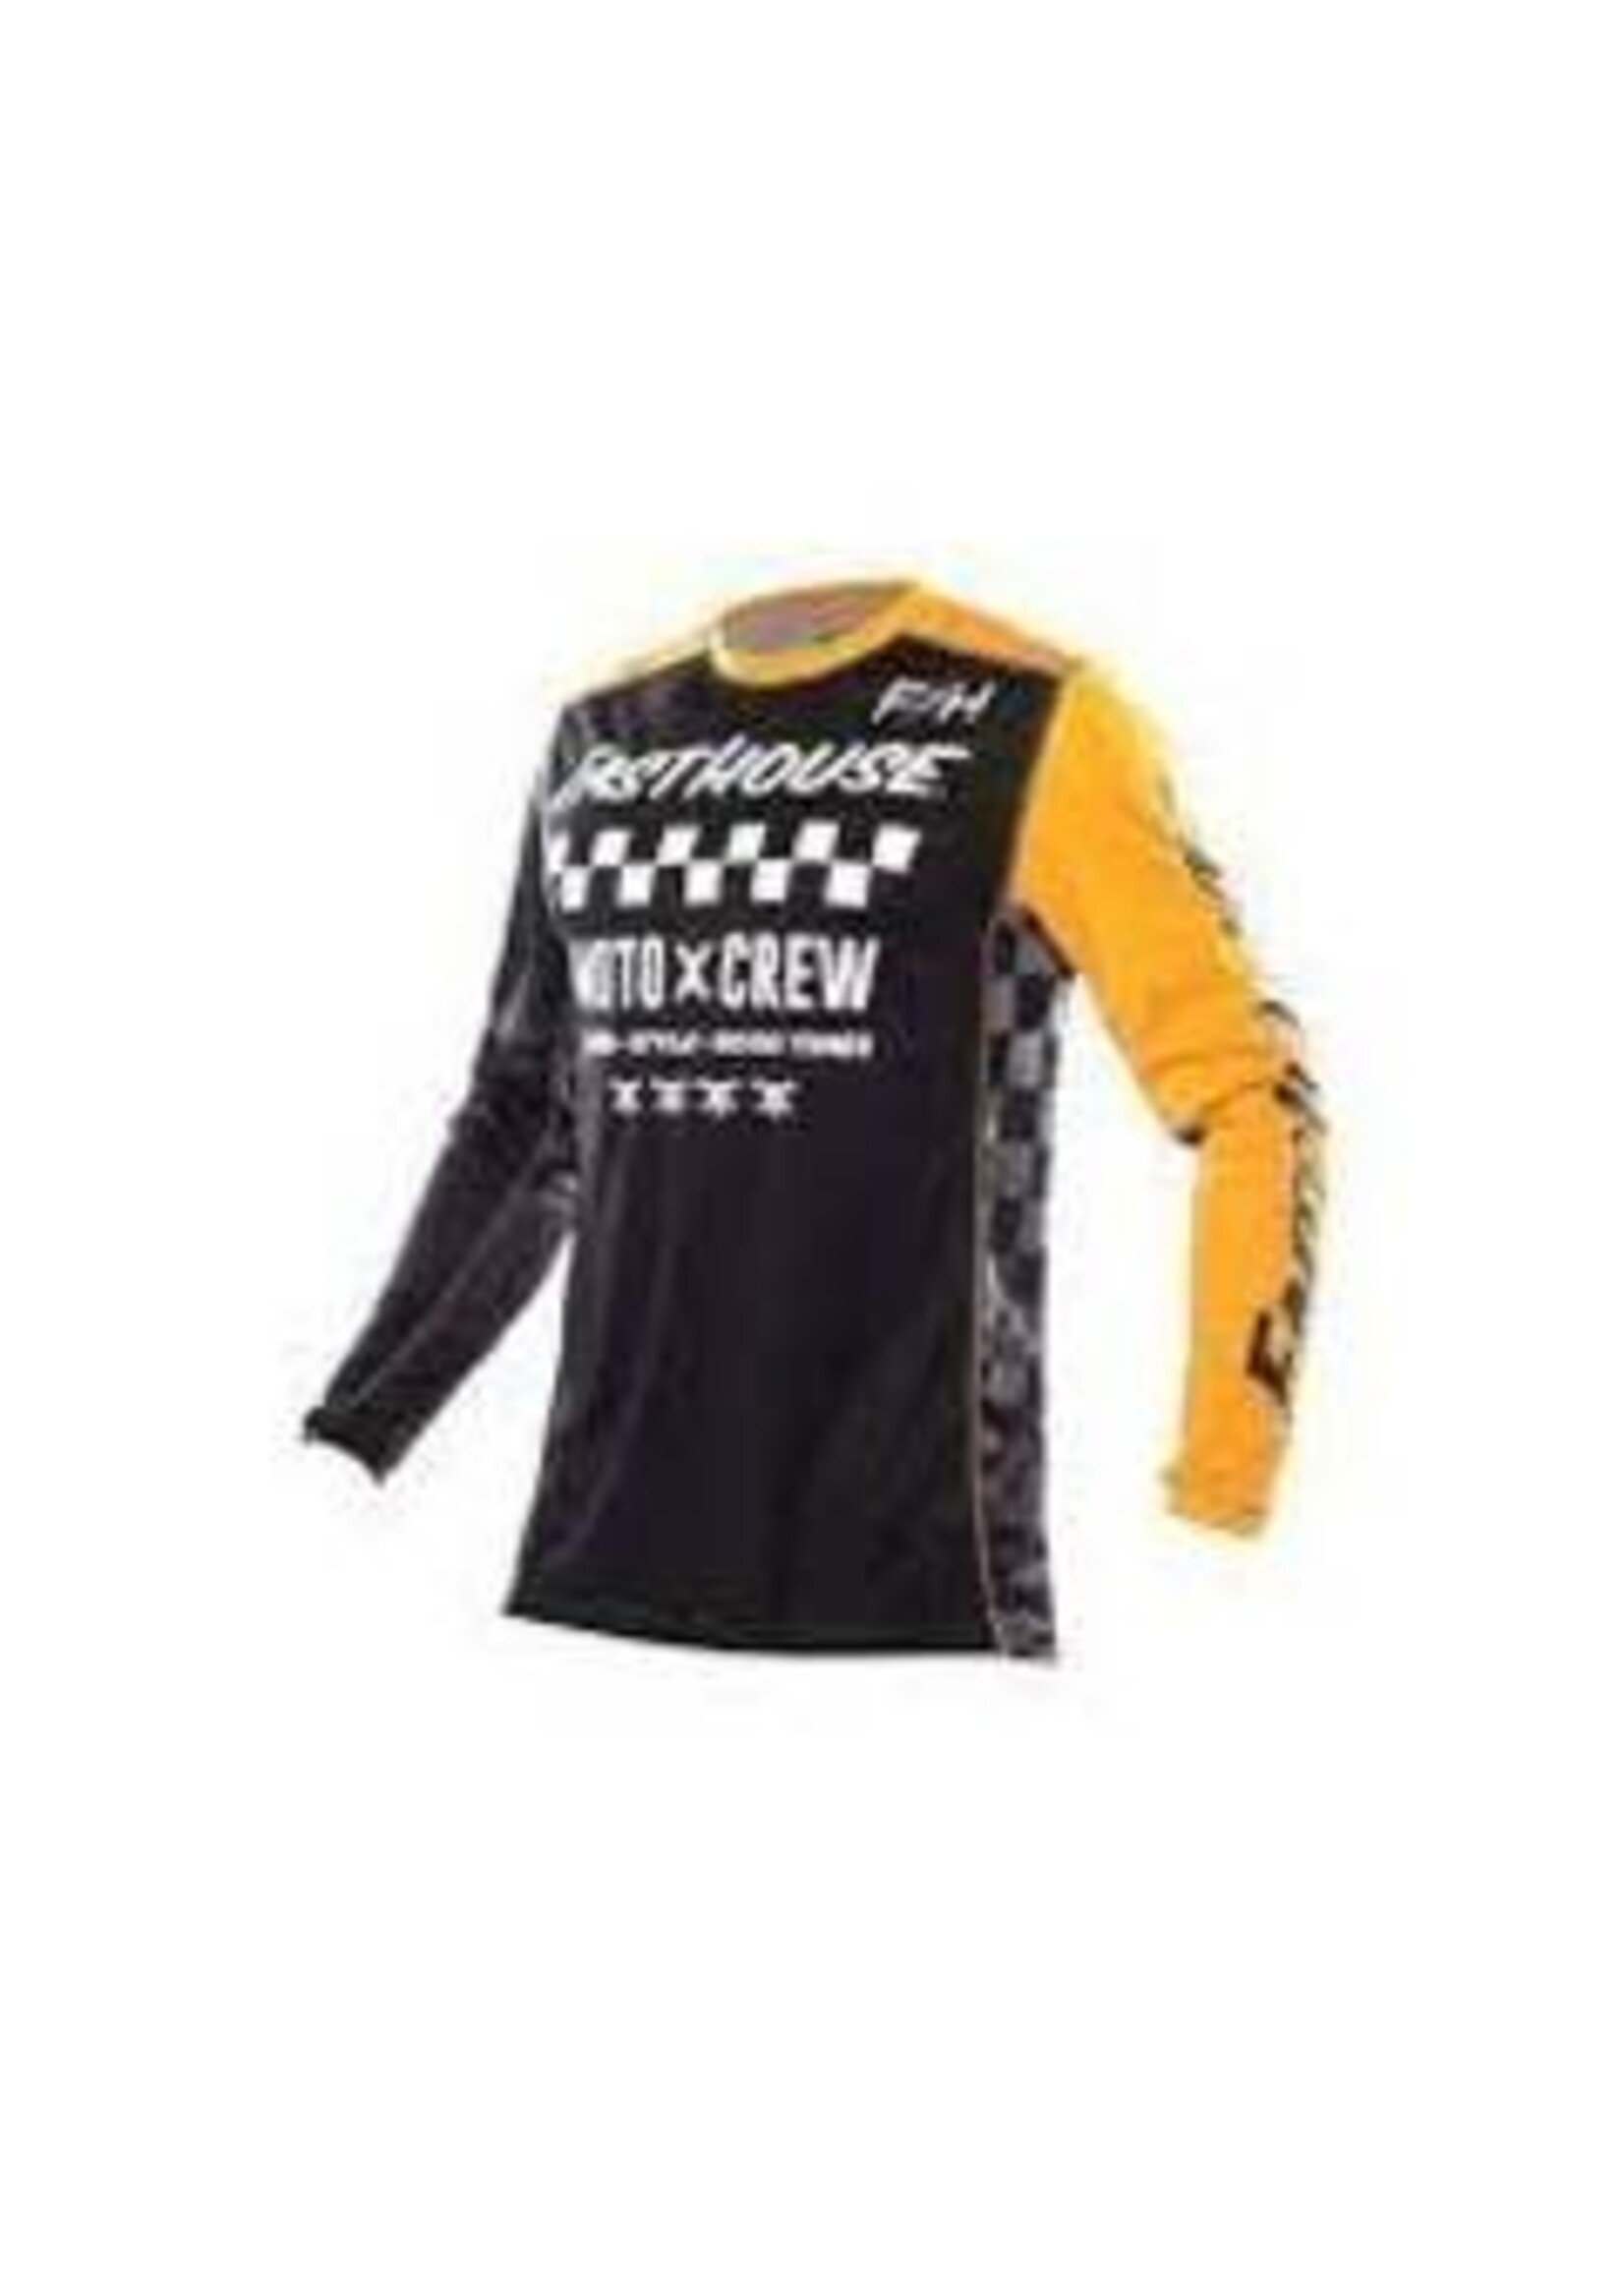 FASTHOUSE Grindhouse Alpha Jersey, Black/Amber